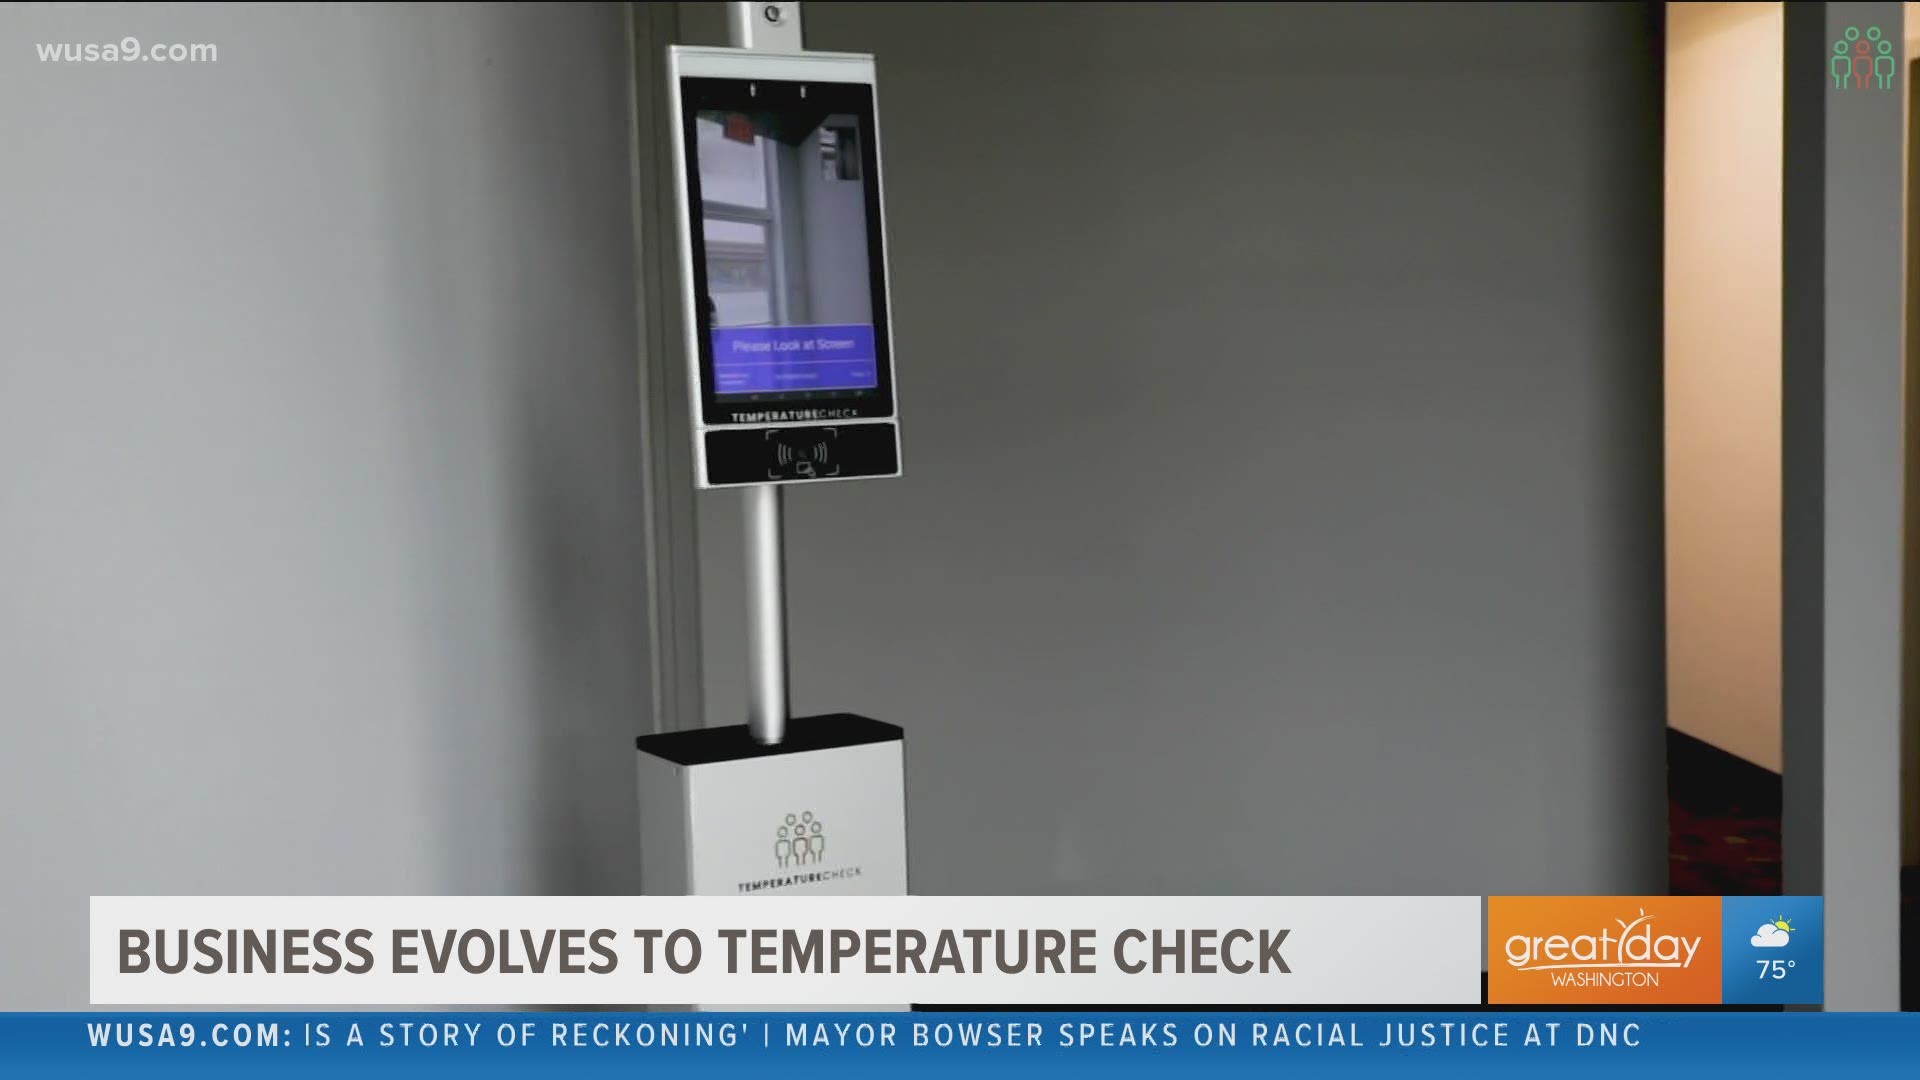 Bruce Pike, founder and CEO explains how his new company Temperature Check helps restaurants and businesses help their patrons and clients feel safe.